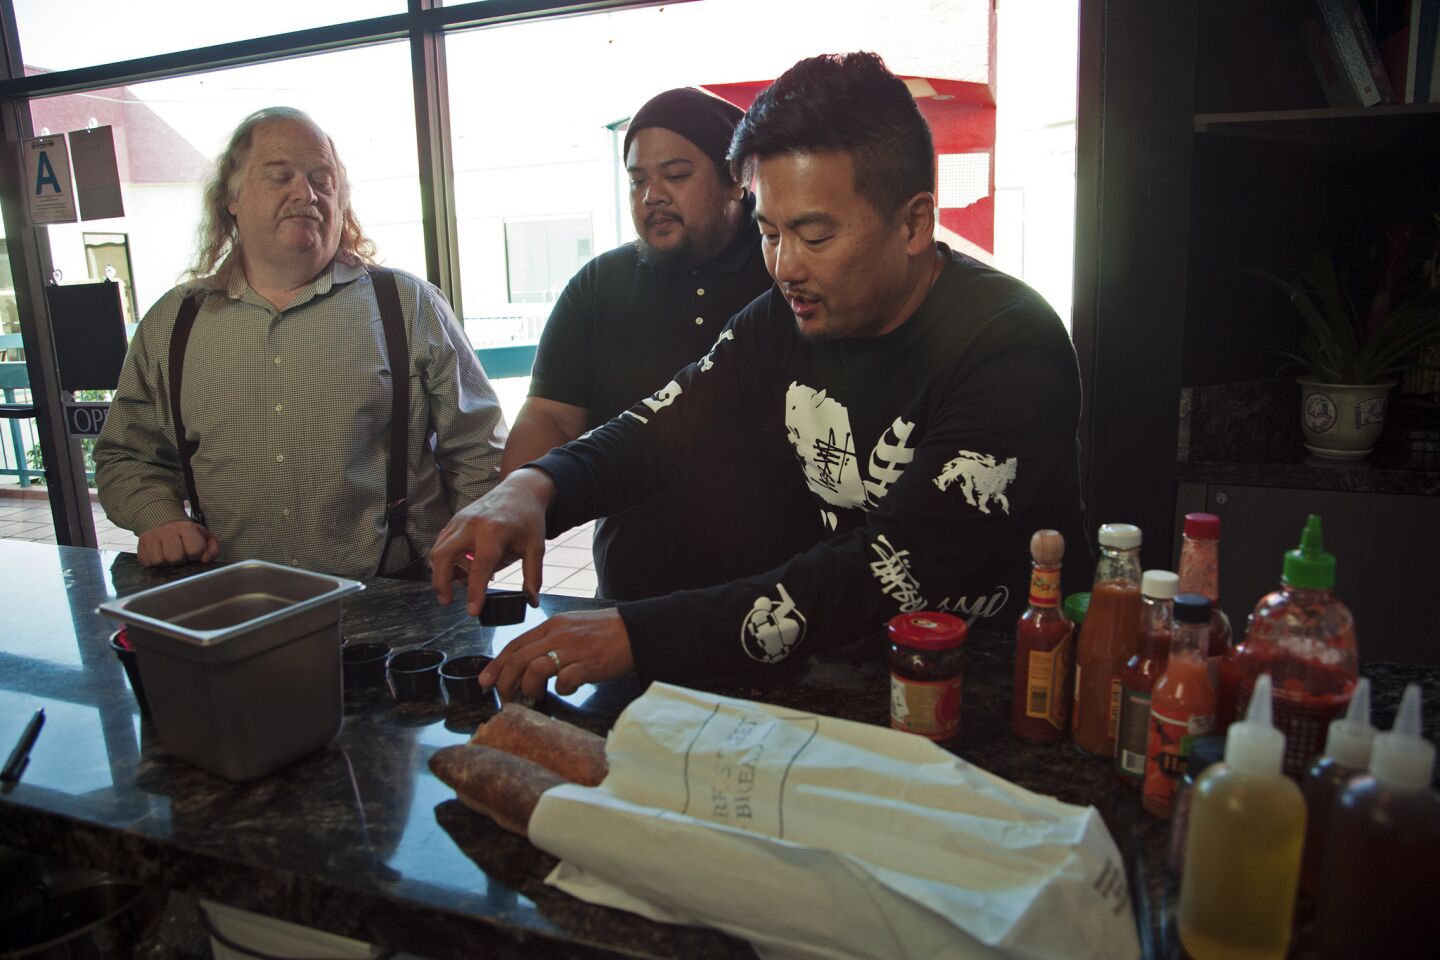 Jonathan Gold, left, chef Alvin Cailan of Eggslut and Ramen Champ, and chef Roy Choi of Kogi taste hot sauces to see if they can find a new favorite.